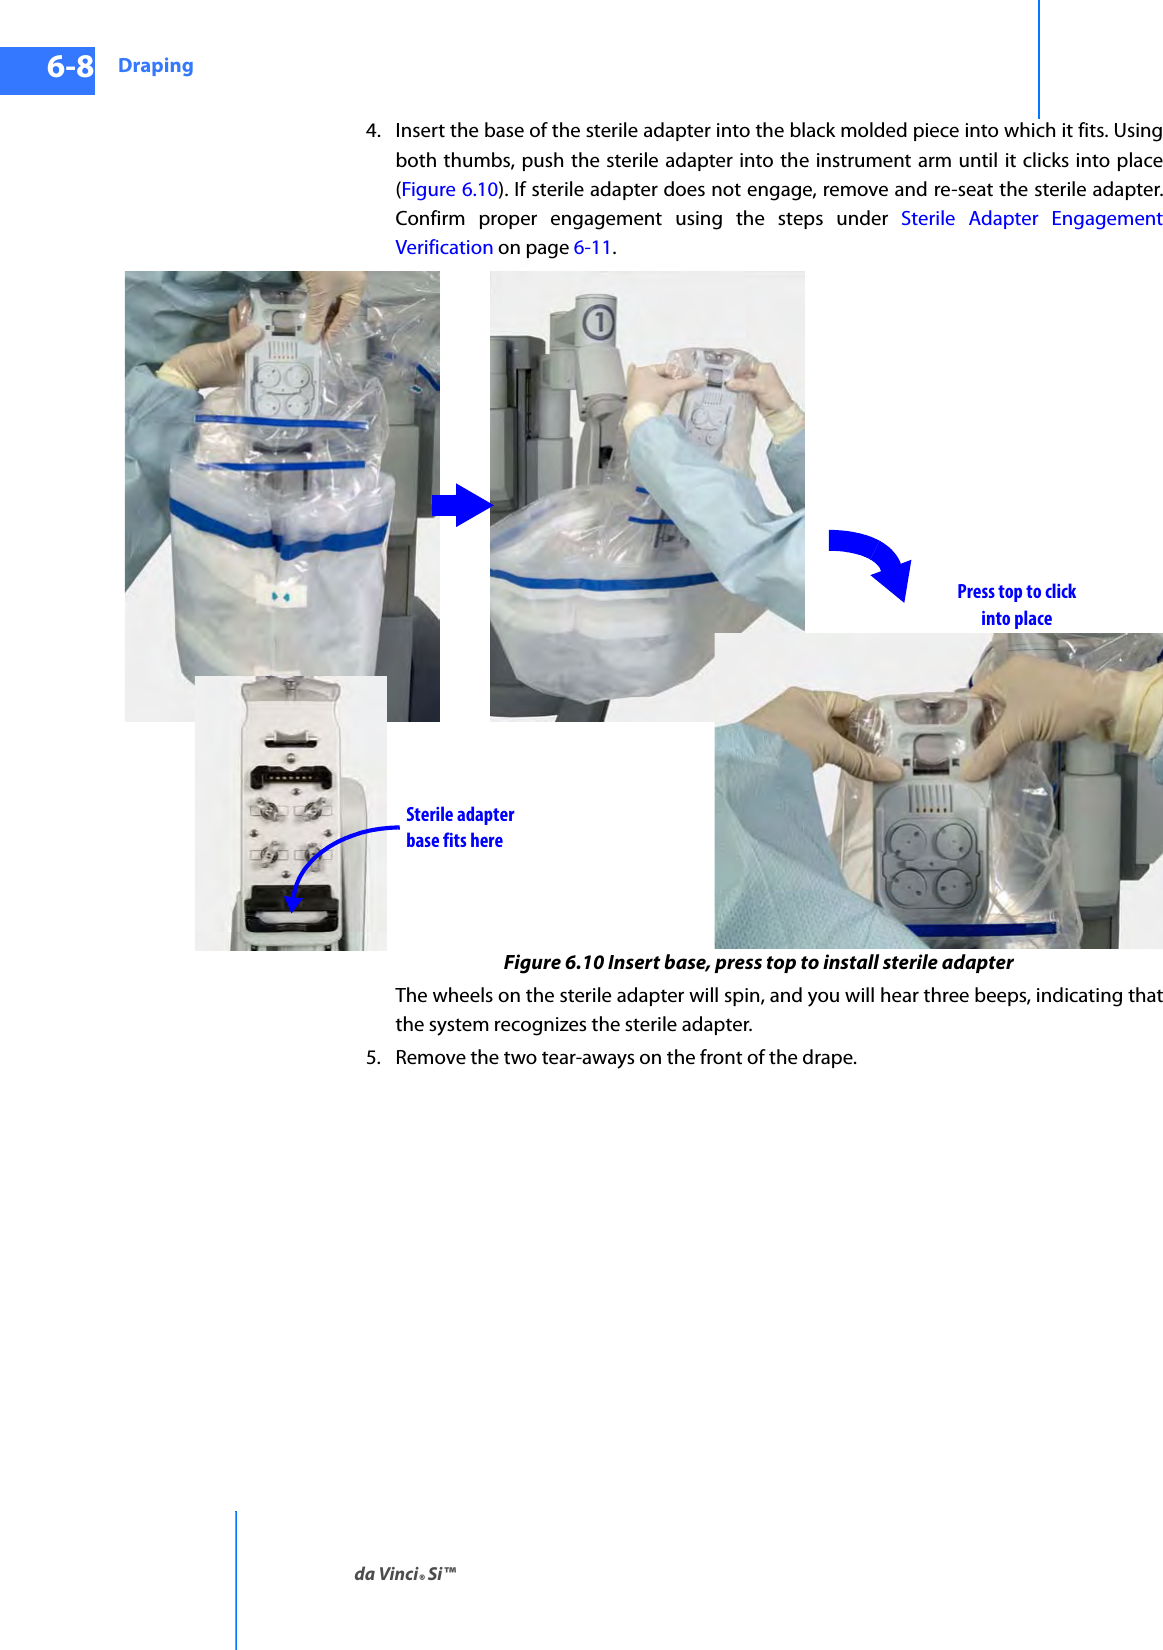 Drapingda Vinci® Si™6-8DRAFT/PRE-RELEASE/CONFIDENTIAL10/9/144. Insert the base of the sterile adapter into the black molded piece into which it fits. Using both thumbs, push the sterile adapter into the instrument arm until it clicks into place (Figure 6.10). If sterile adapter does not engage, remove and re-seat the sterile adapter. Confirm proper engagement using the steps under Sterile Adapter Engagement Verification on page 6-11.Figure 6.10 Insert base, press top to install sterile adapterThe wheels on the sterile adapter will spin, and you will hear three beeps, indicating that the system recognizes the sterile adapter.5. Remove the two tear-aways on the front of the drape. Sterile adapterbase fits herePress top to clickinto place